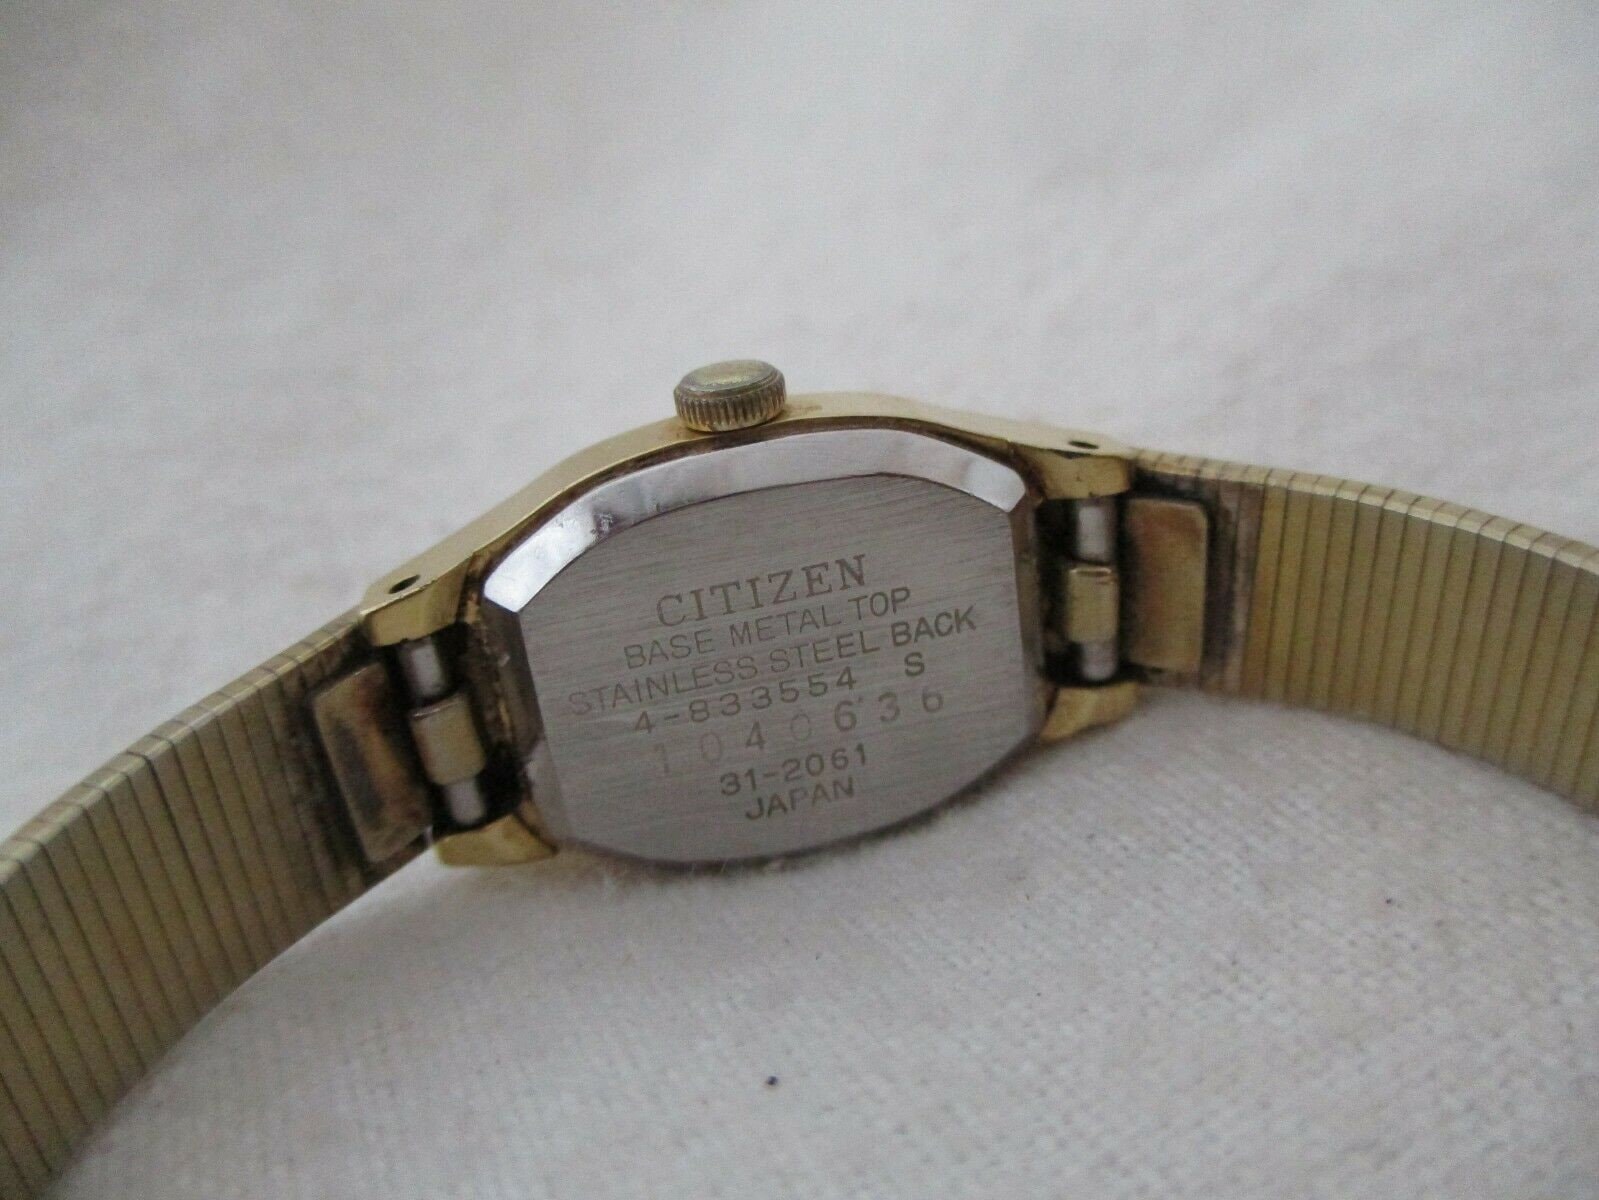 Citizen Watch Gold Toned Band Square Shaped Face | Etsy